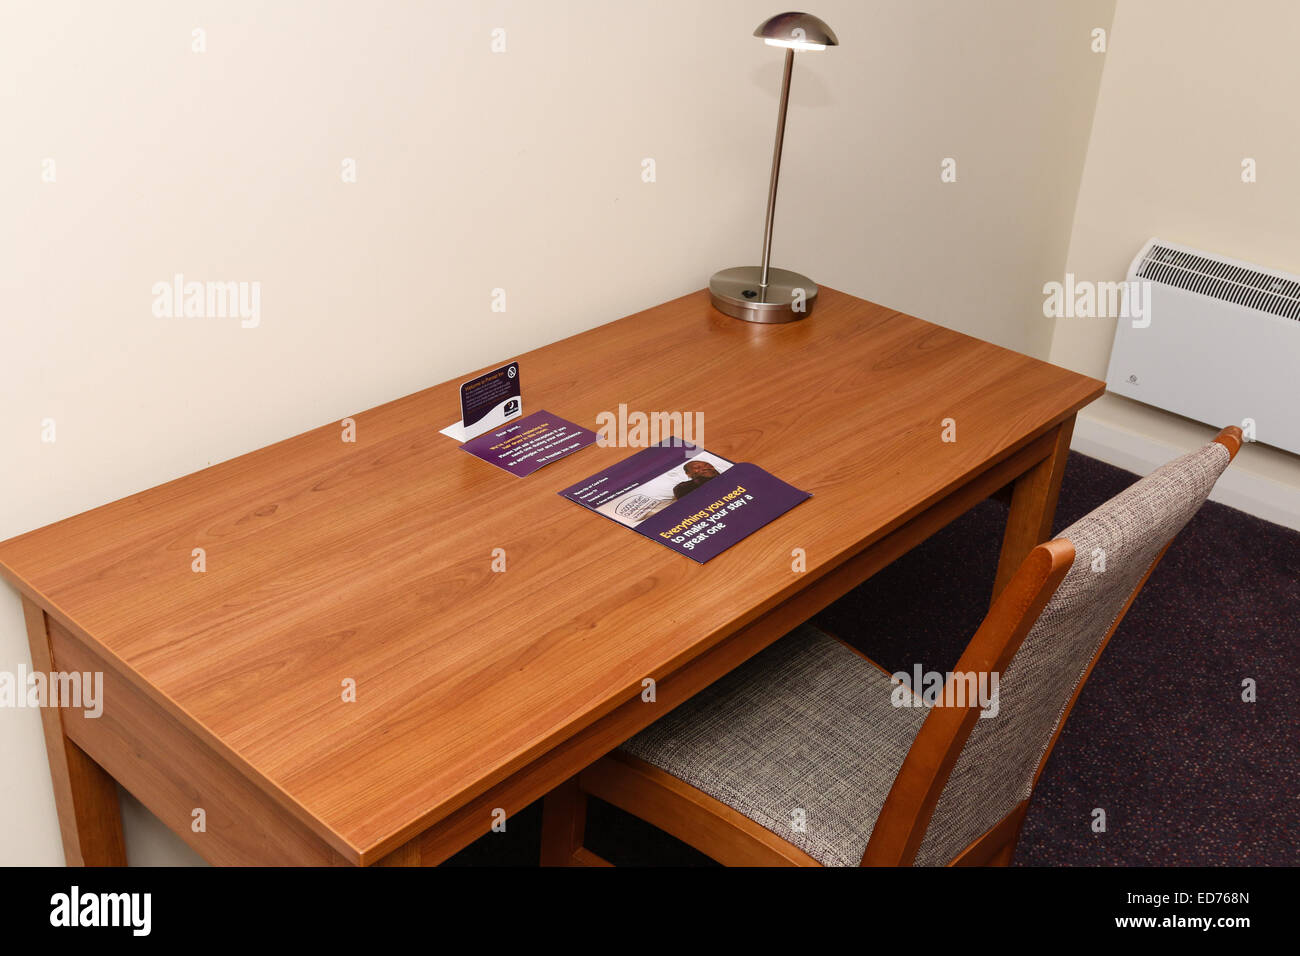 Desk in a Premier Inn hotel room.  Premier Inn is the UK's largest hotel brand, with over 50,000 rooms and more than 650 hotels. Stock Photo